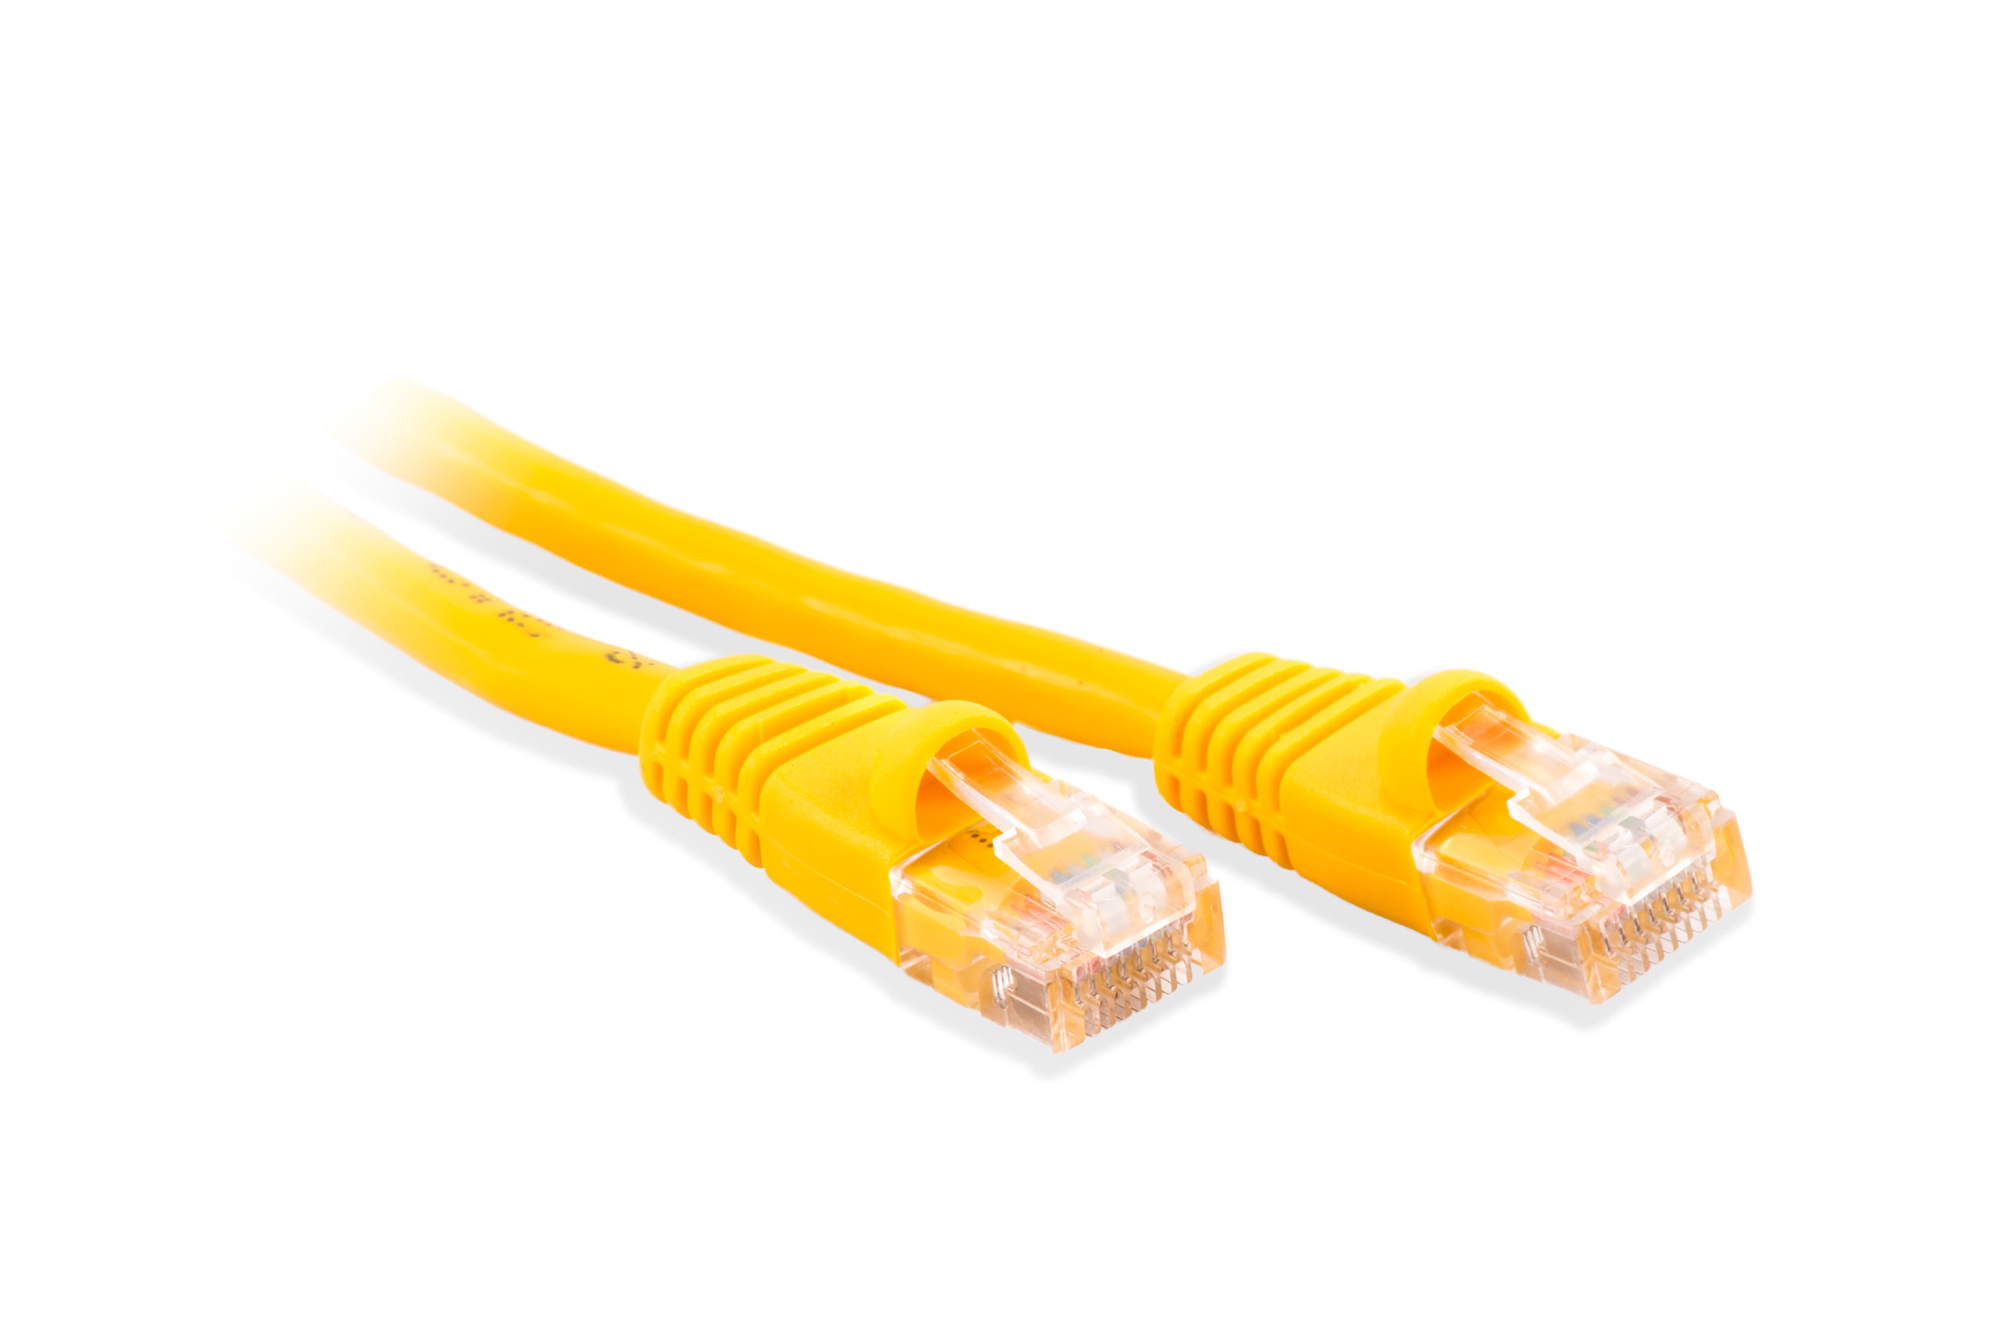 10ft Cat5e Ethernet Patch Cable - Yellow Color - Snagless Boot, Stranded, RJ45, 350Mhz, 24AWG